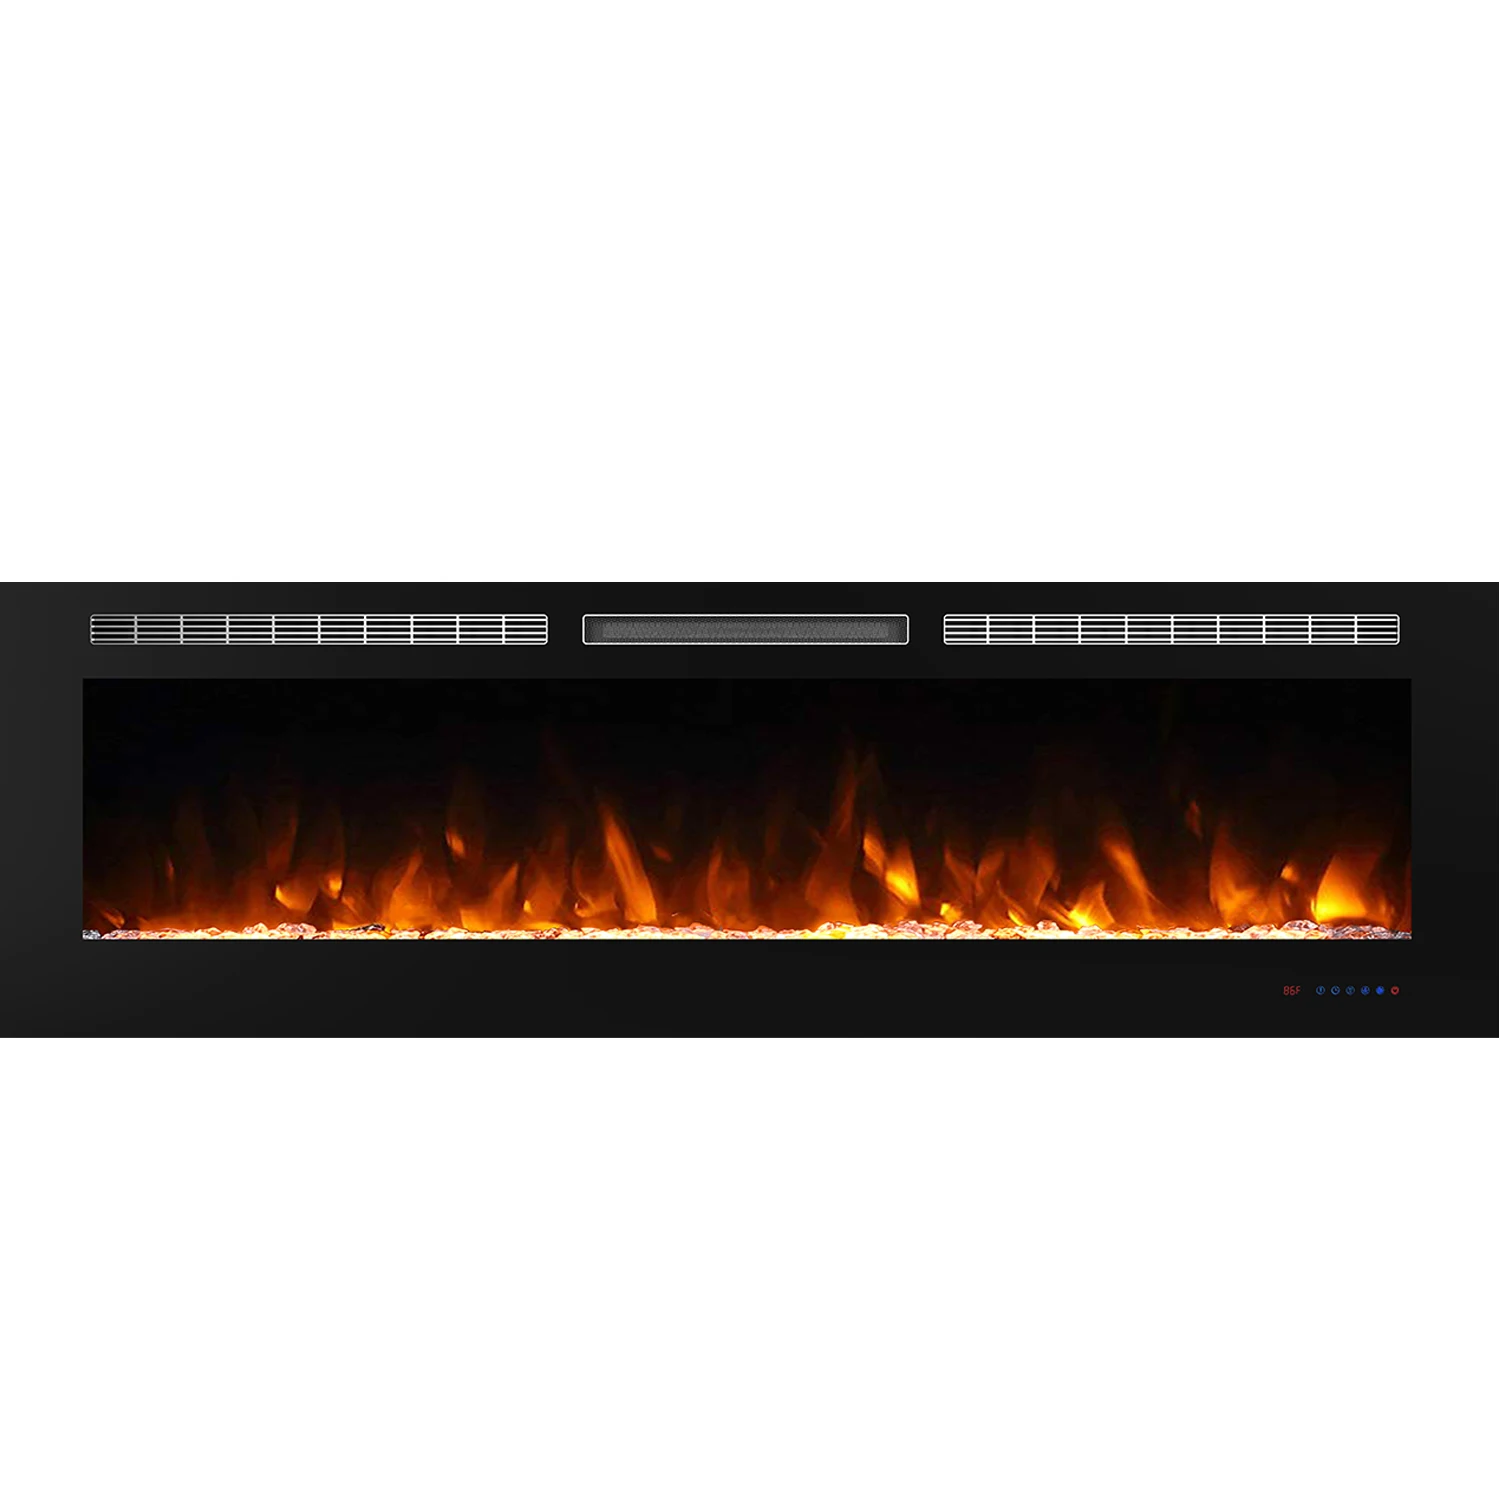 Luxstar High Quality Indoor 72 Inch Recessed Electric Fireplace Heater 1500W Remote Control Decor Led Flame And Crystal Logest